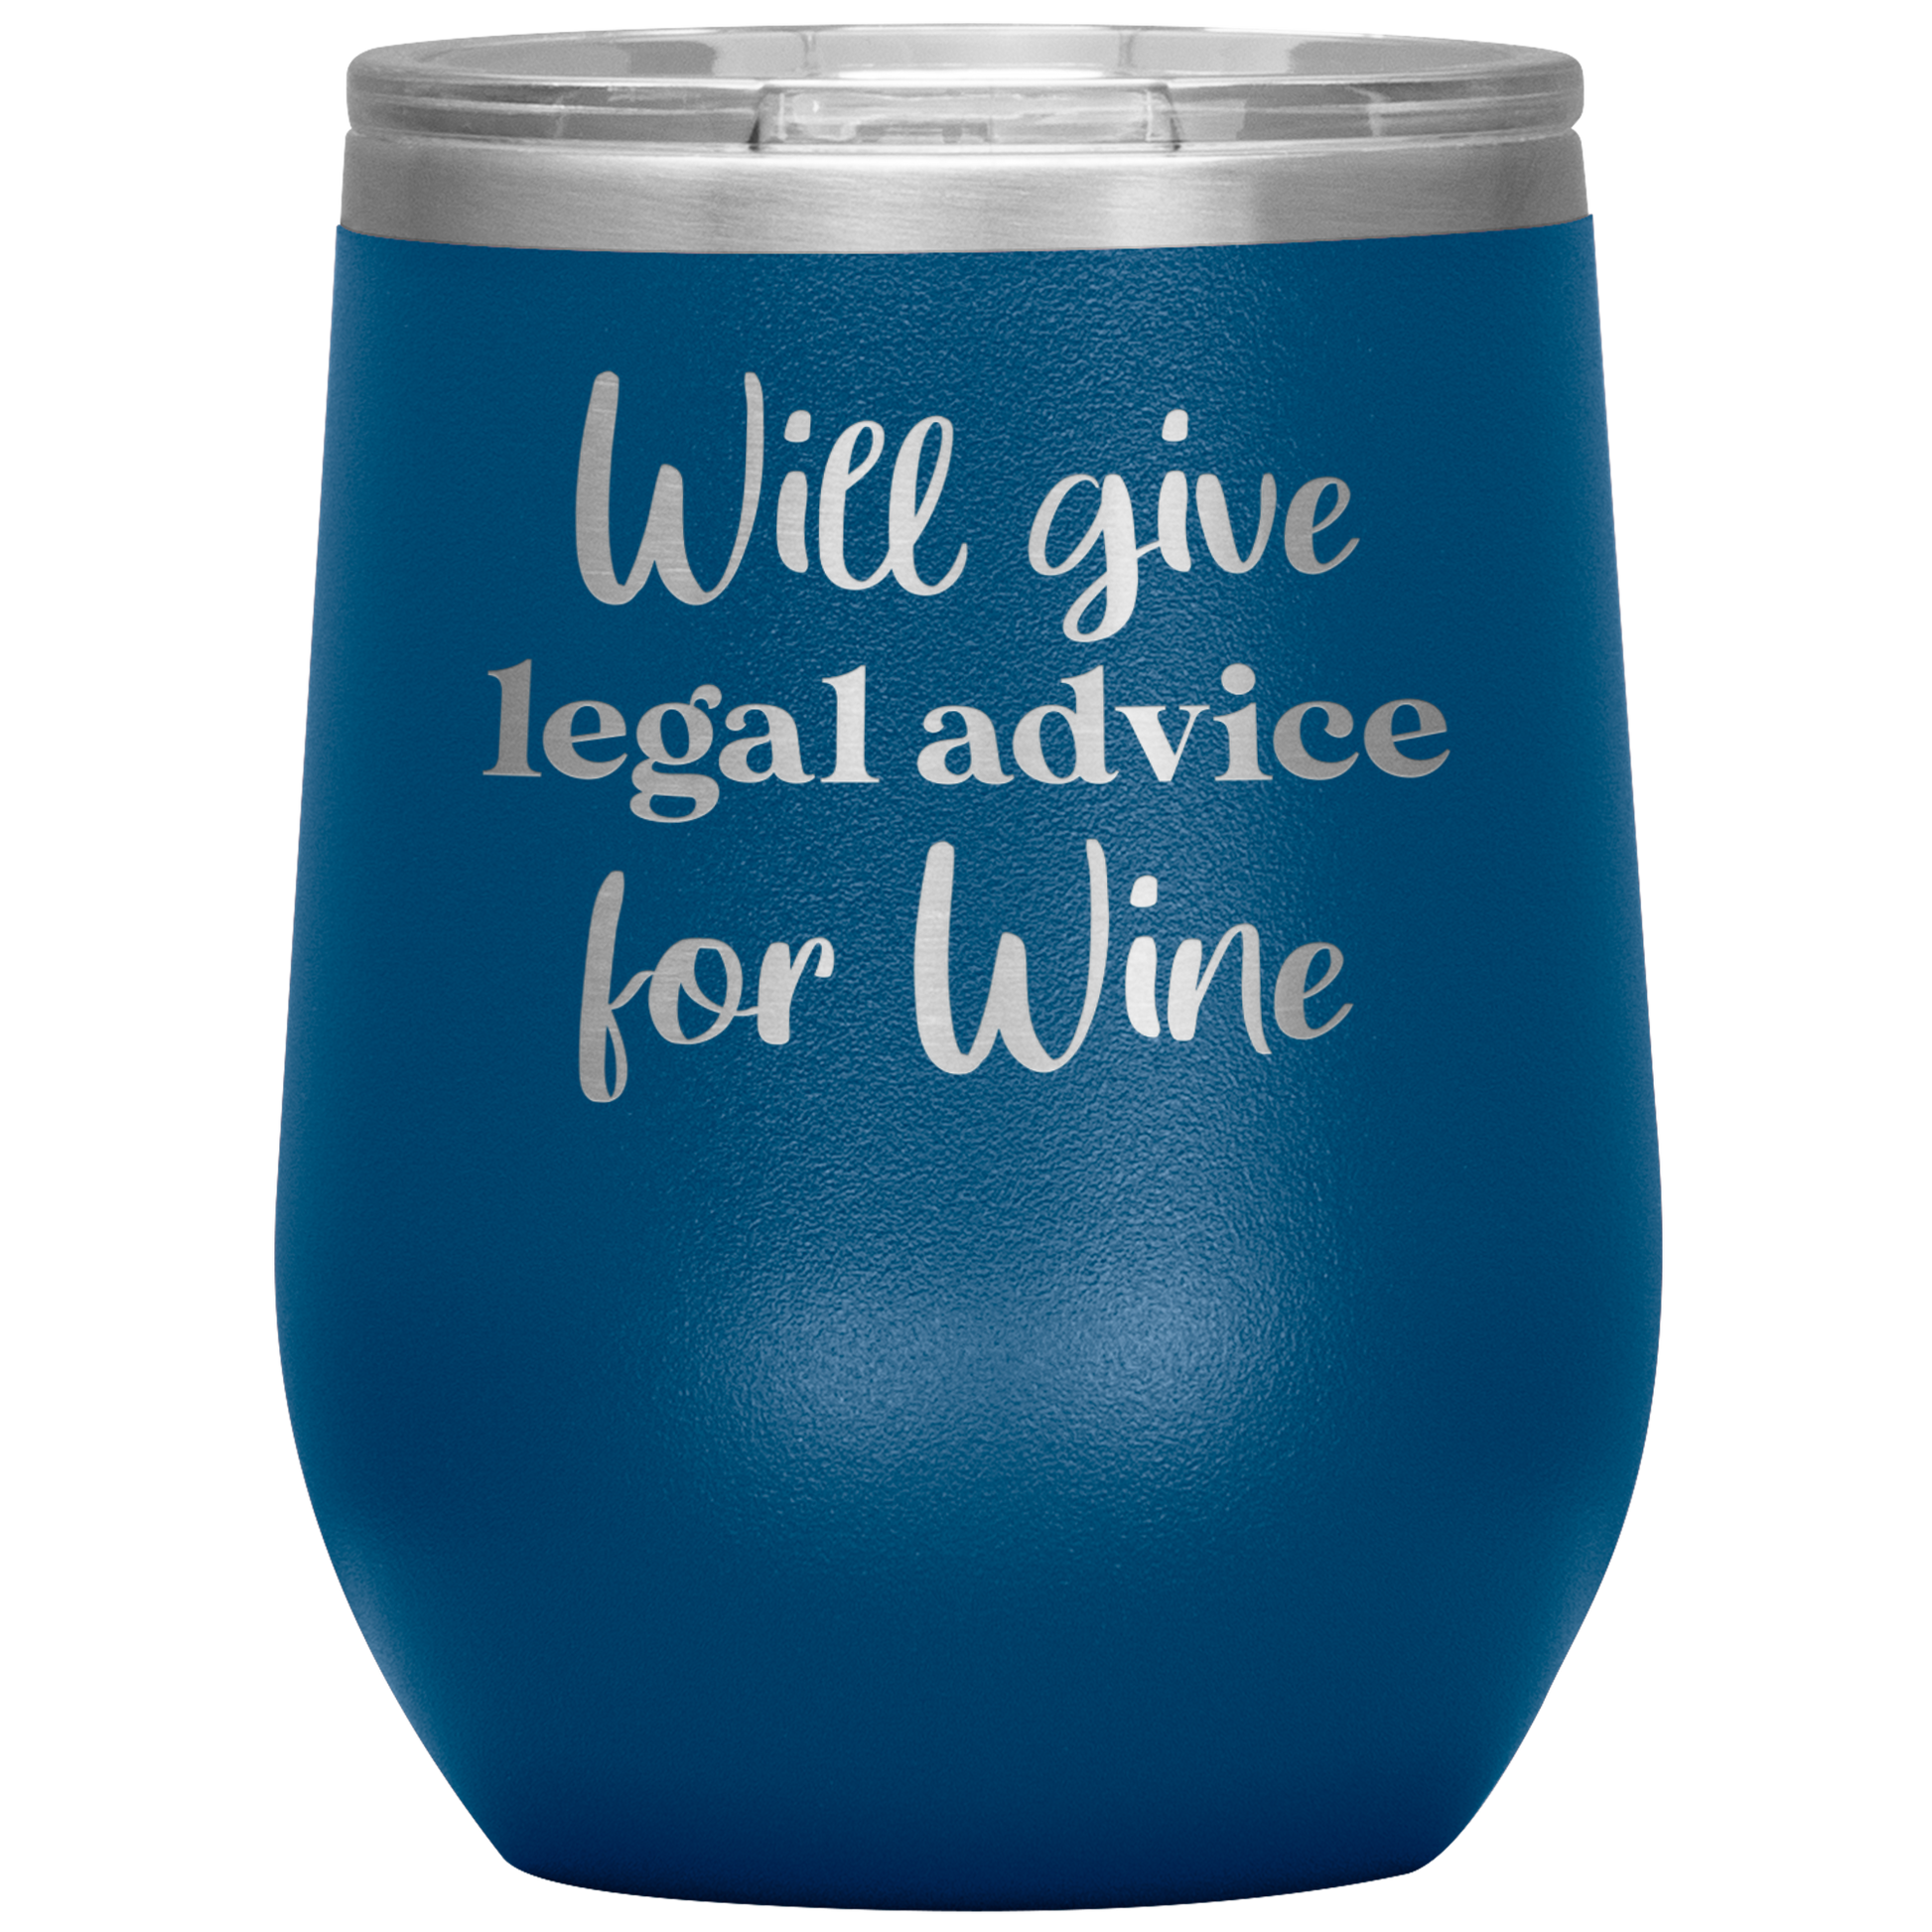 Lawyer Gifts, Will Give Legal Advice for Wine Tumbler Mug Gift Idea Law School Judge Attorney Student Paralegal Graduation Prosecutor Starcove Fashion